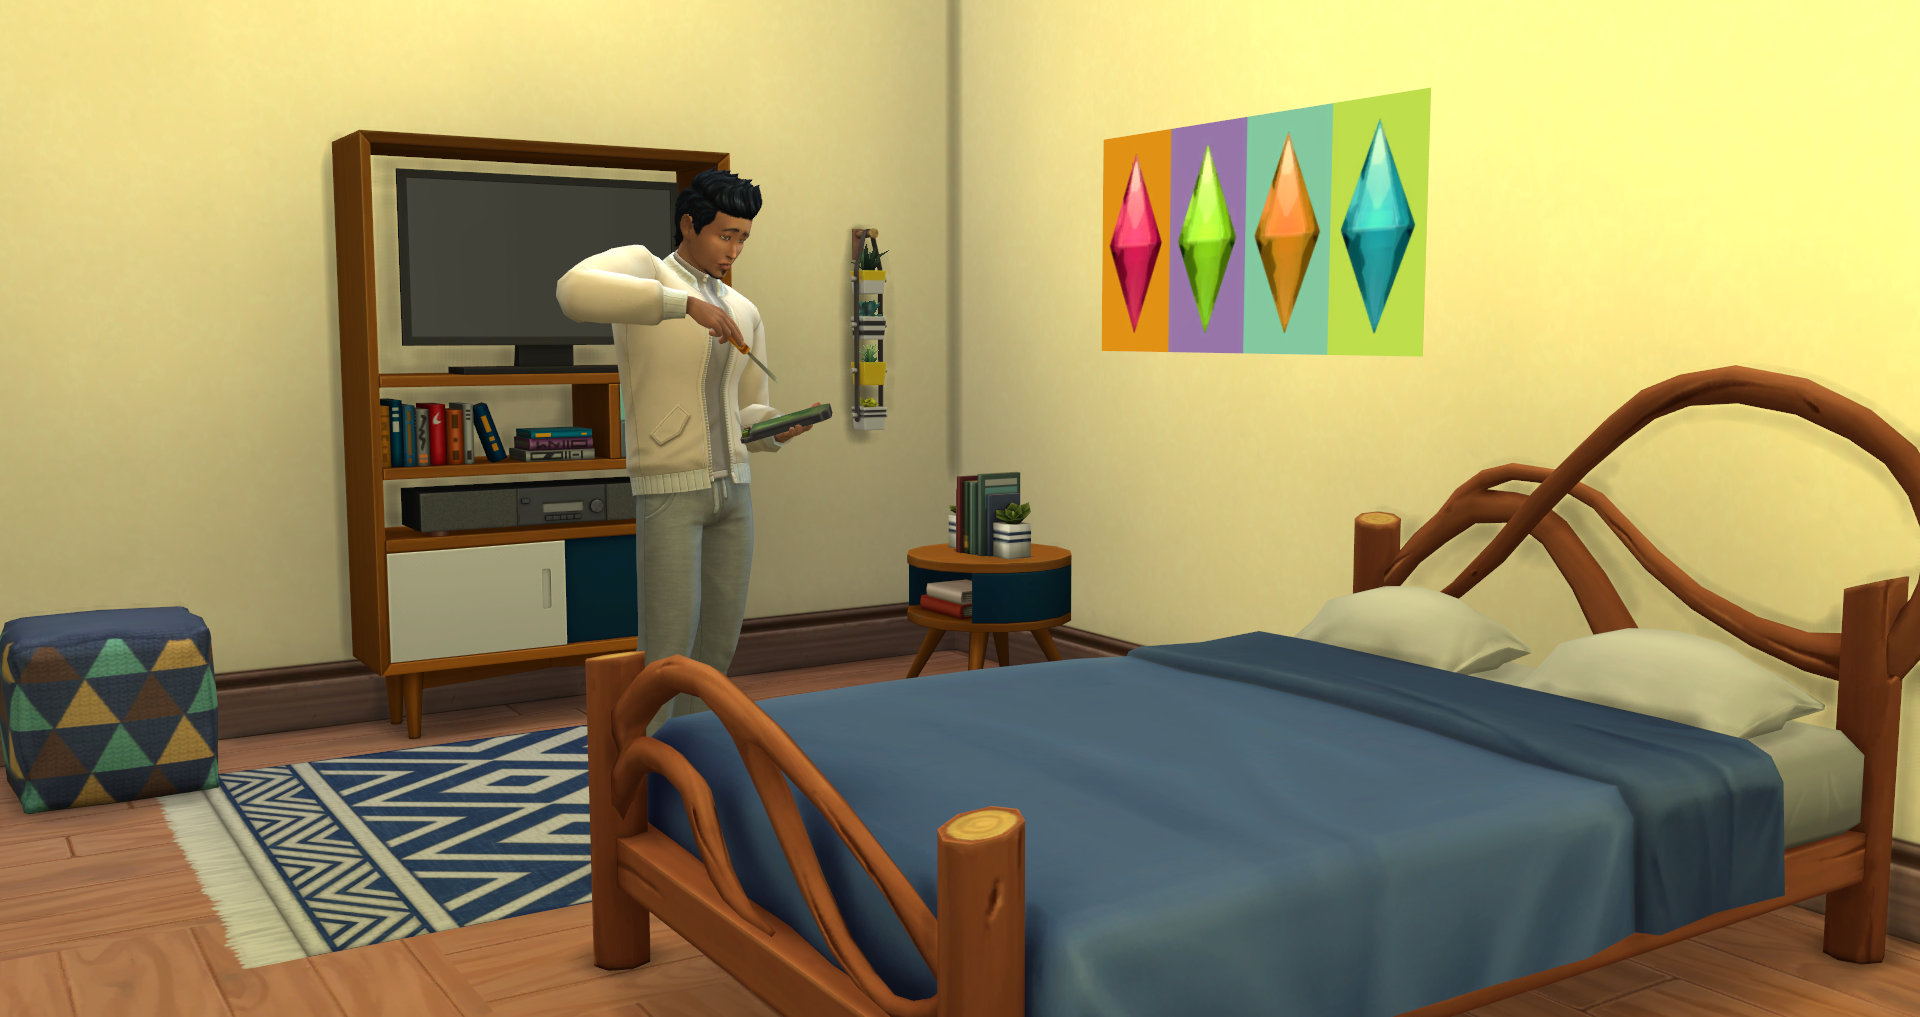 The Sims 4 January Patch Brings Upgrades to Beds and Bookends SimsVIP